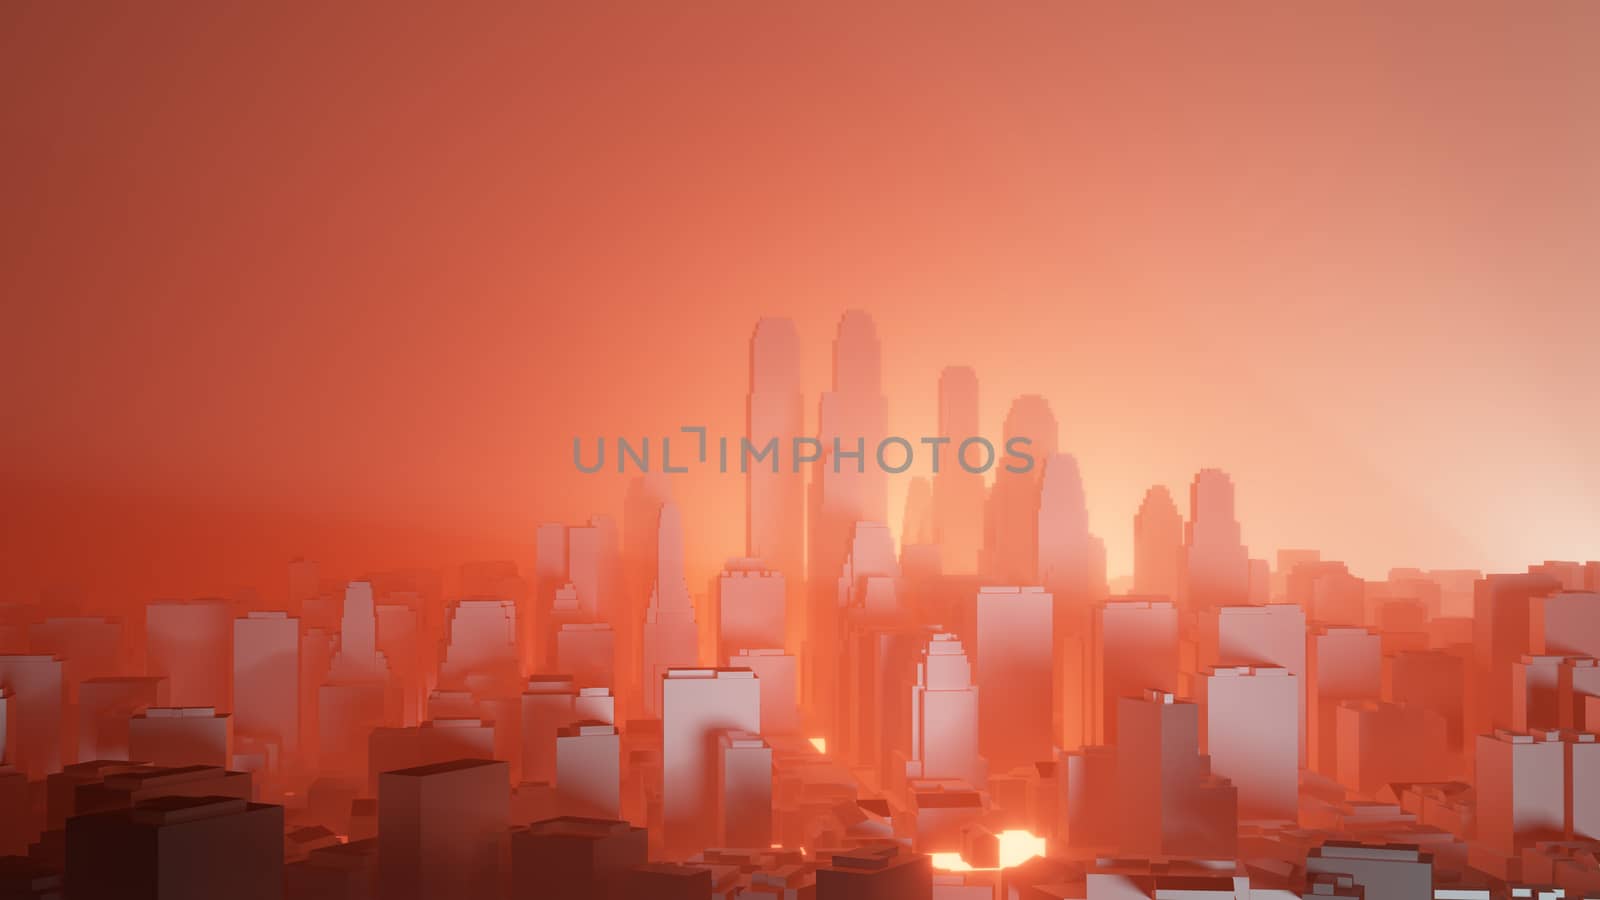 City in red fog. Atmospheric emissions or explosion. 3D illustration. Concept of air pollution or military action